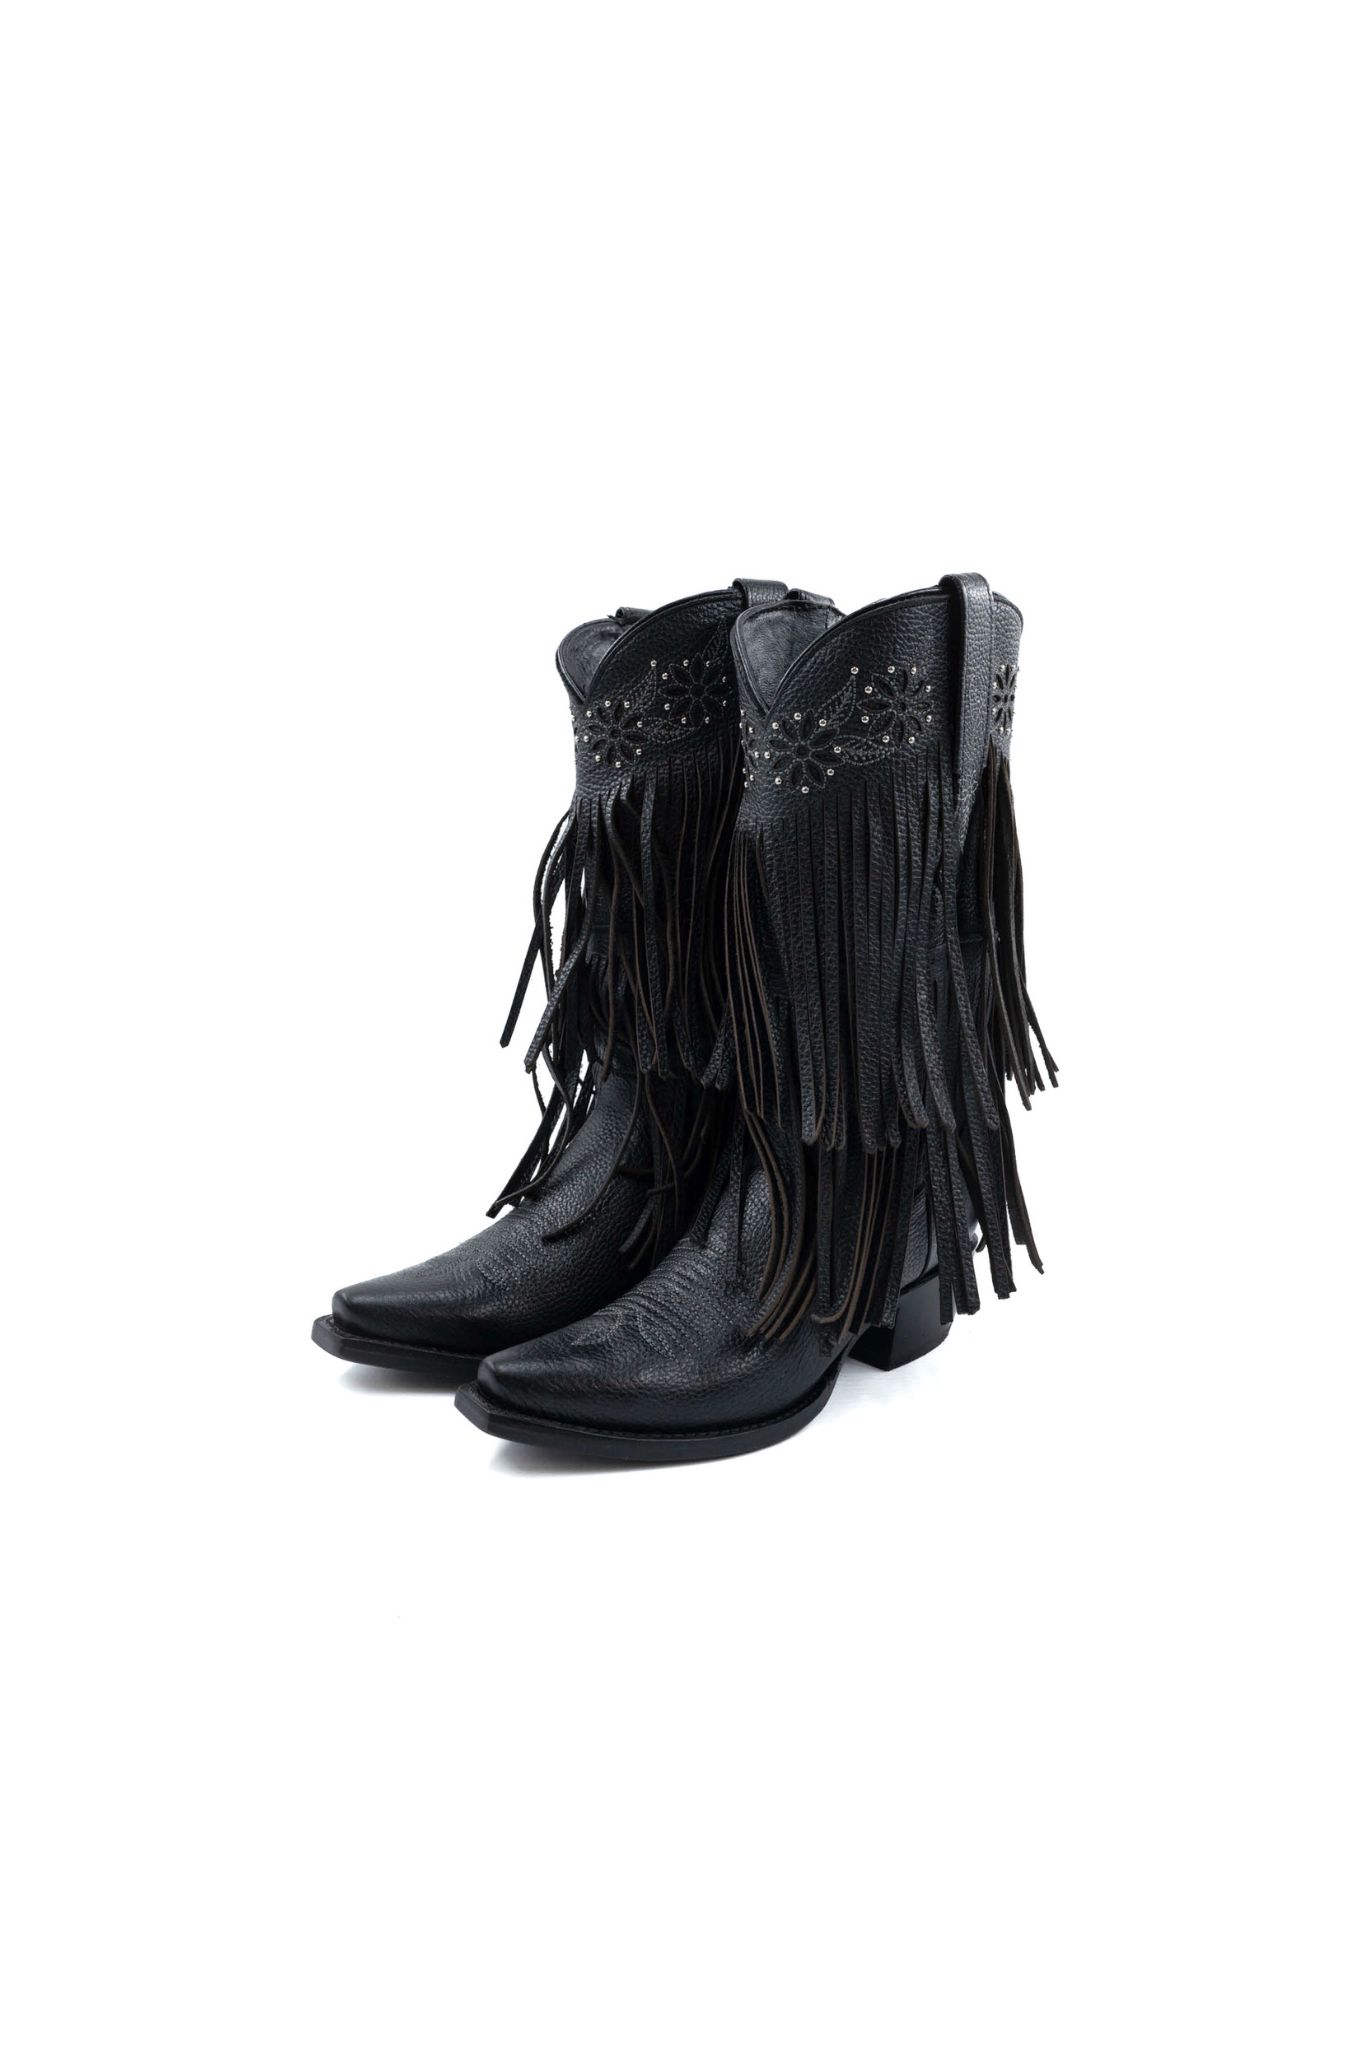 The Barbas Snip Toe Boot